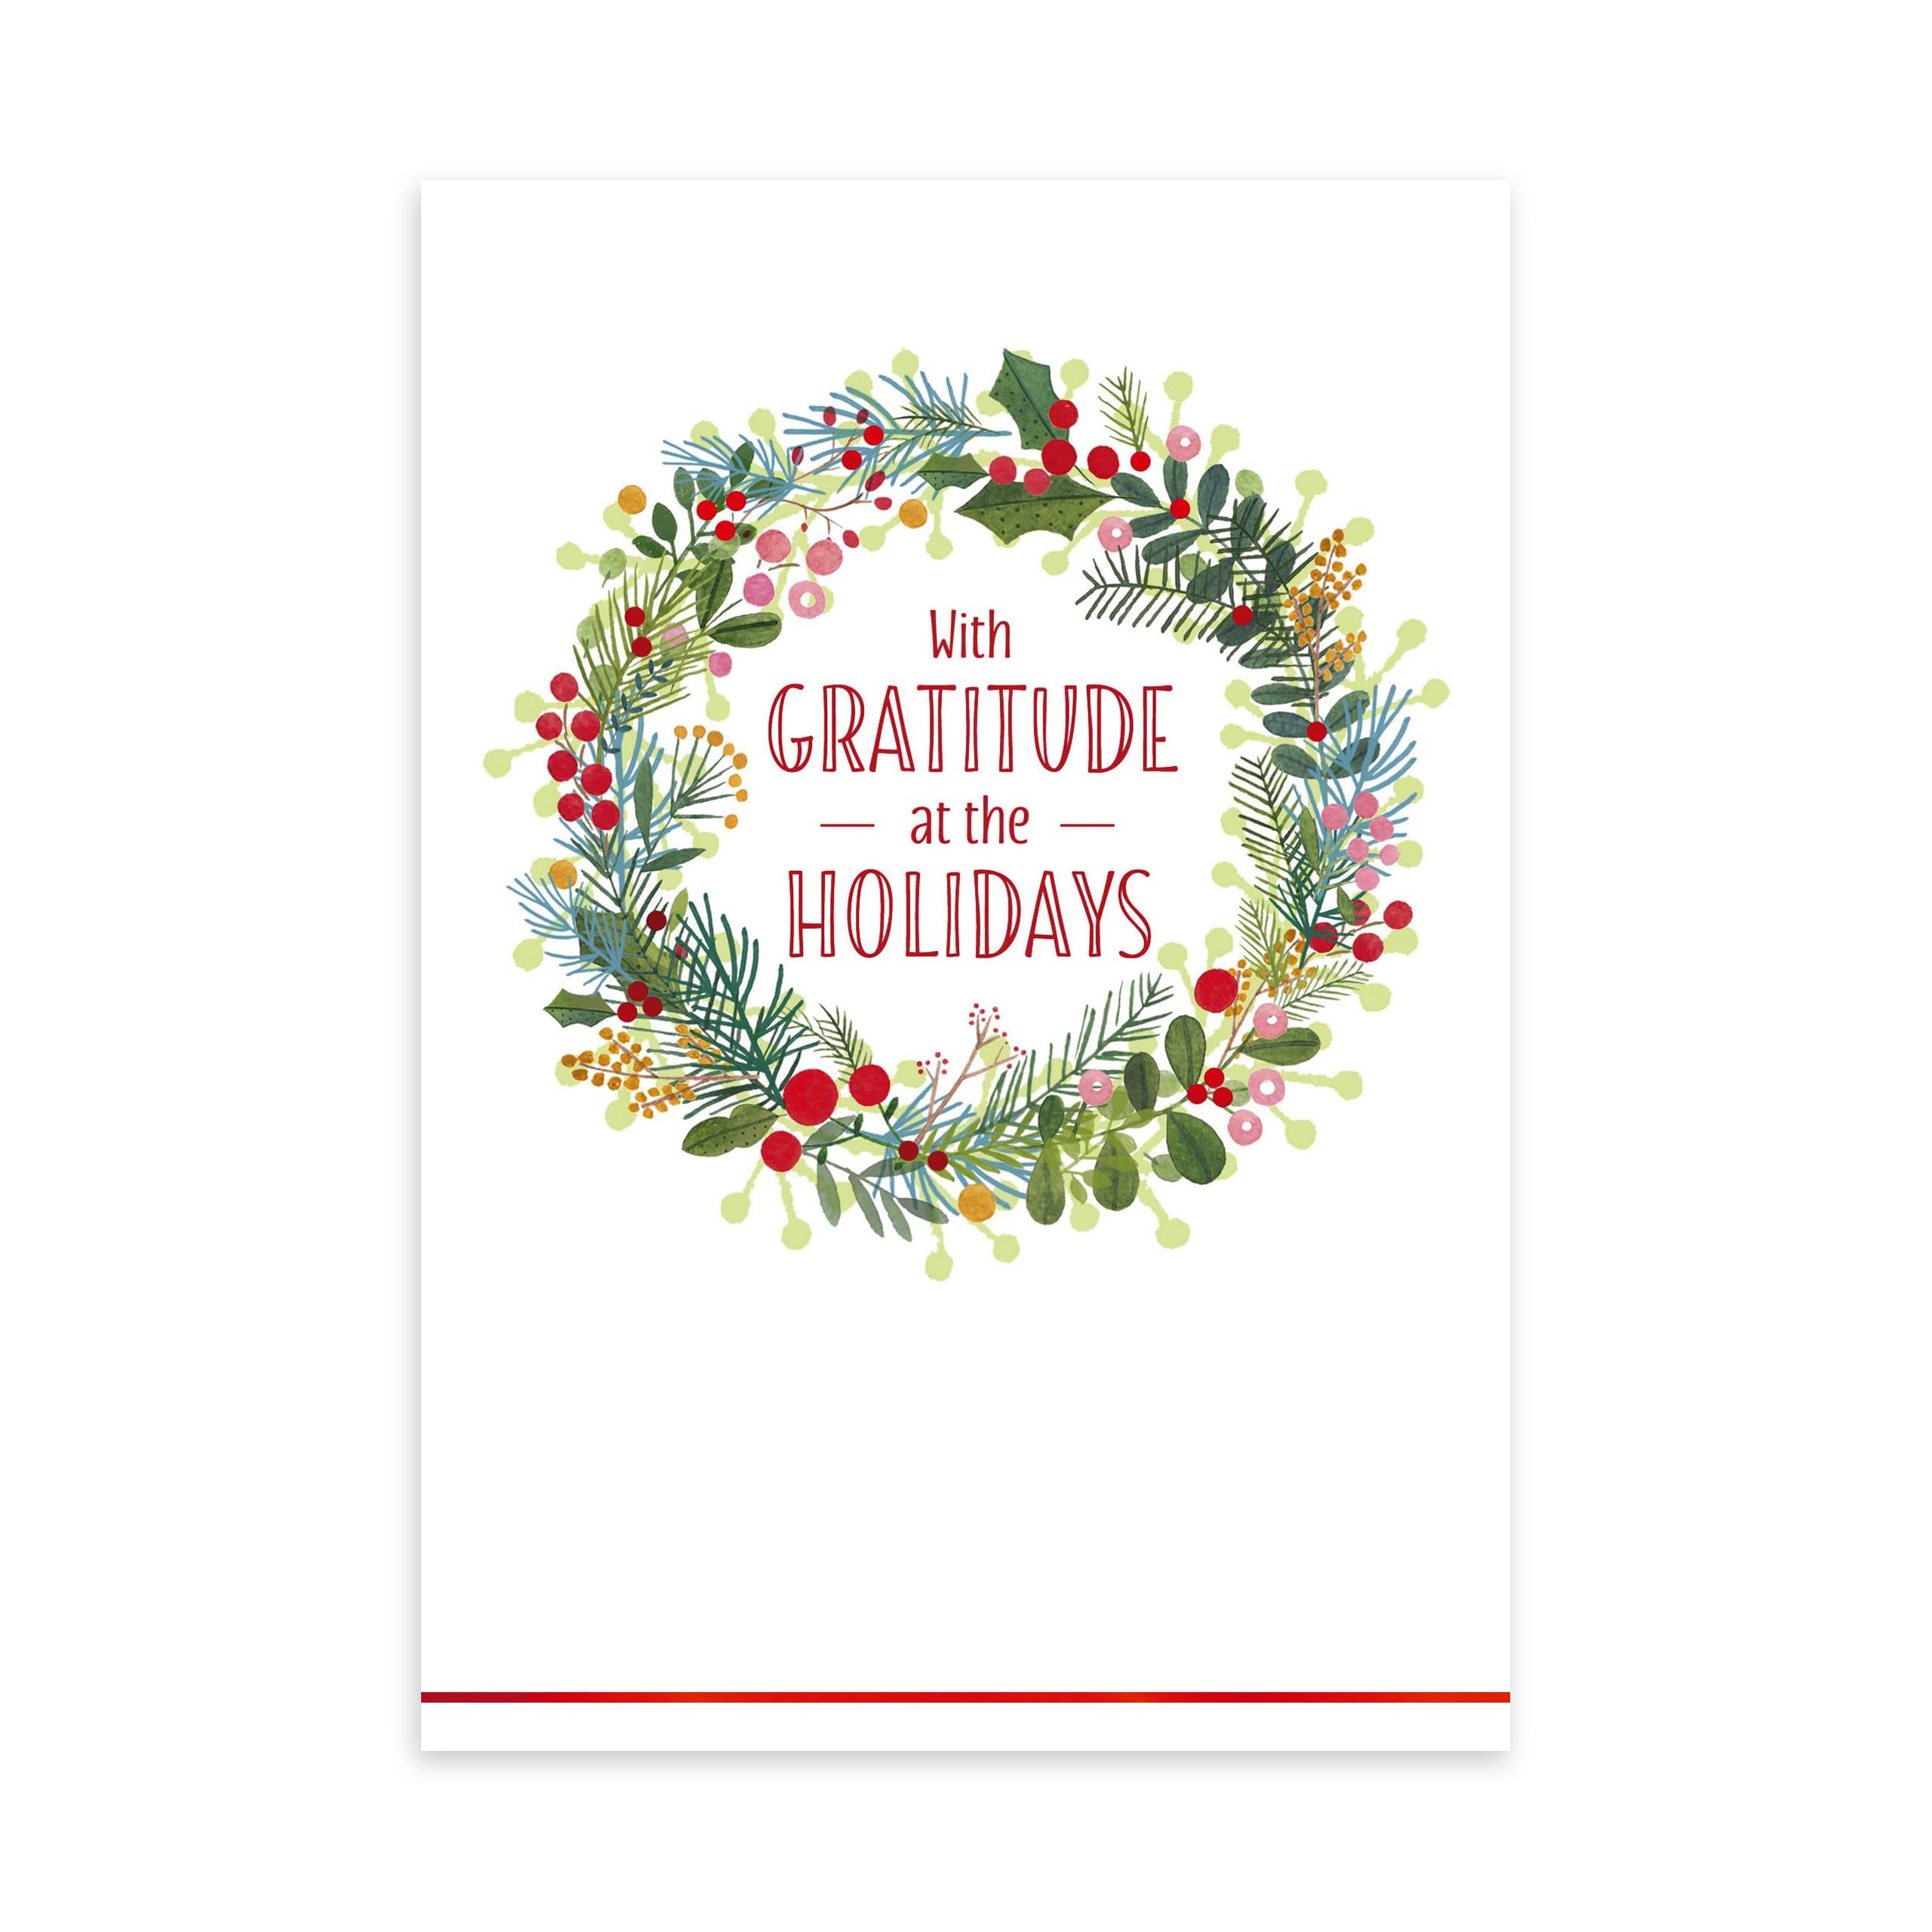 Pack of 25 Greeting Cards Stylish Snowman Hallmark Business Holiday Cards for Employees